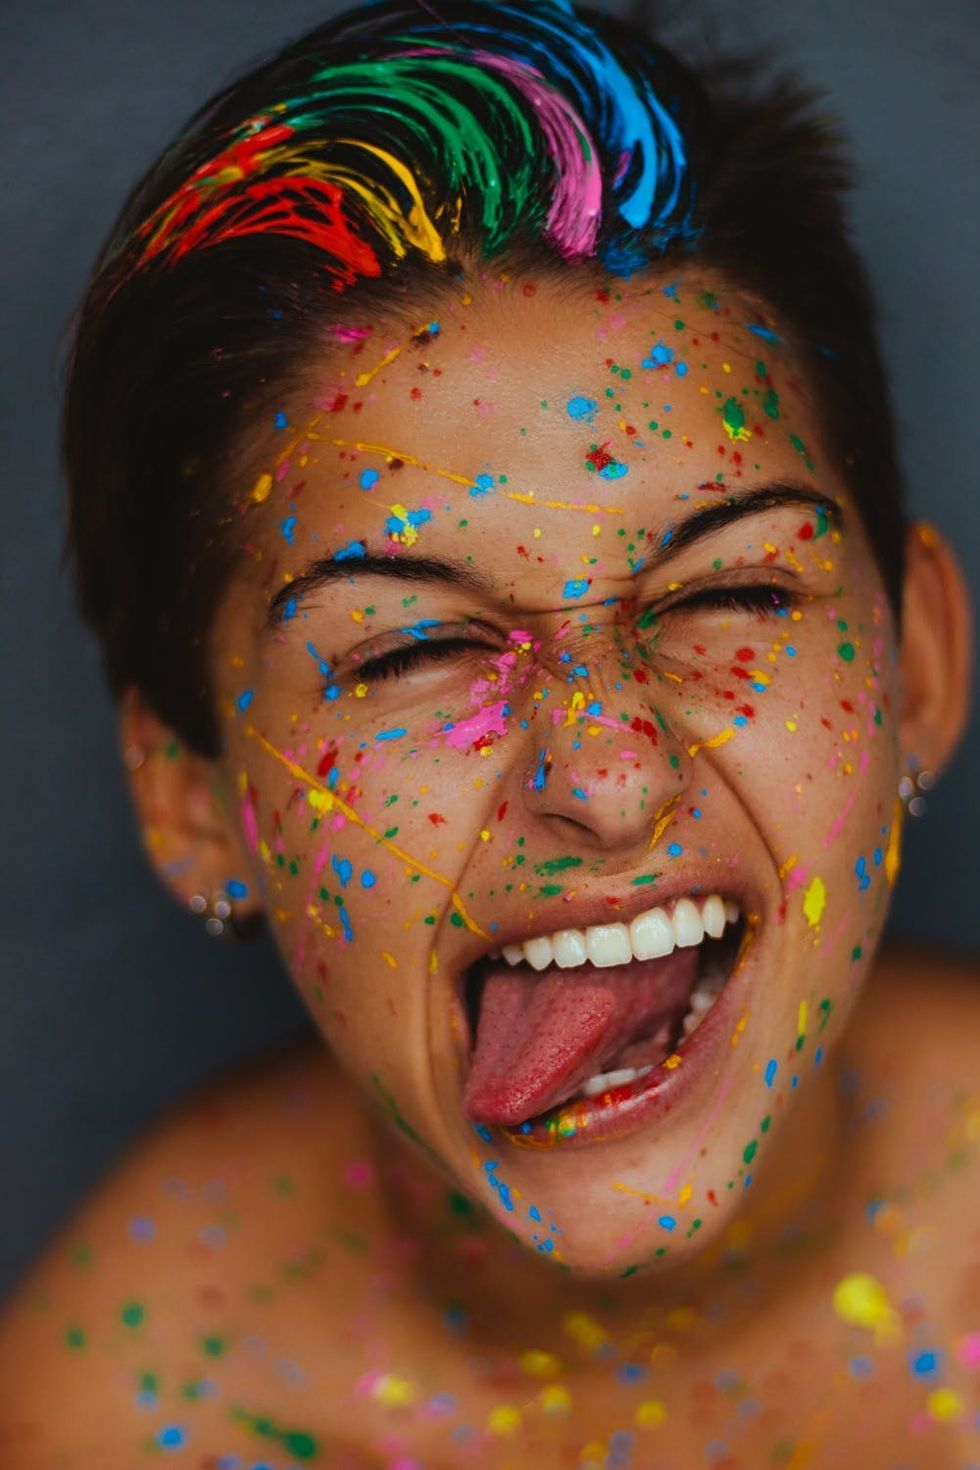 https://www.pexels.com/photo/woman-s-face-with-color-splatters-1937301/